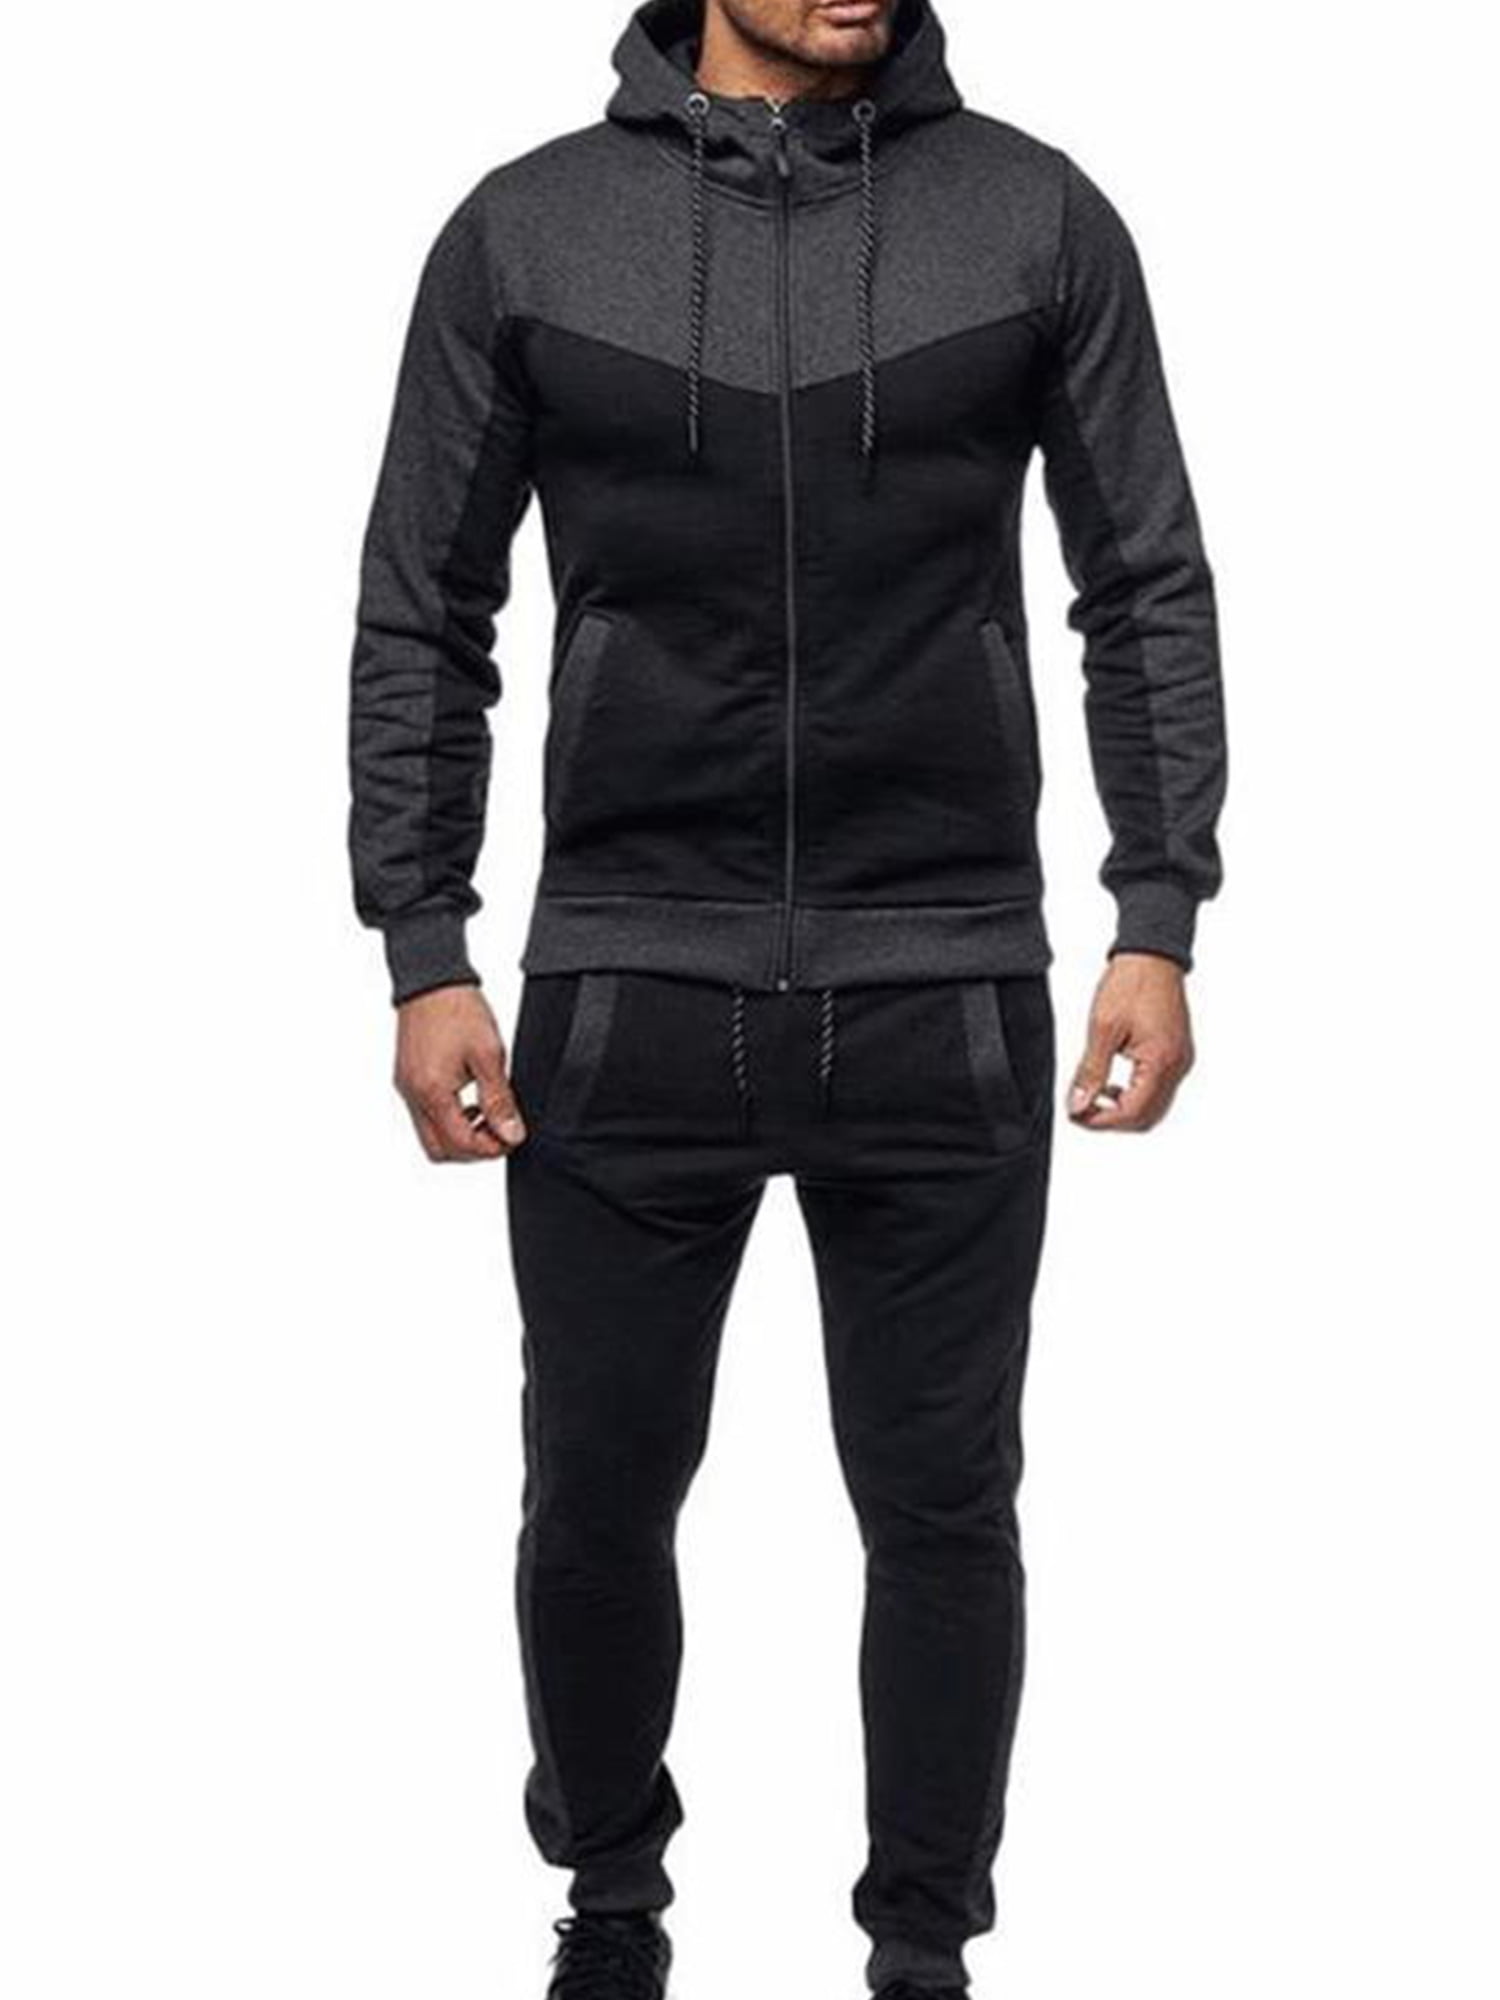 Mens Athletic Tracksuit Full Zip Warm Jogging Sweat Suits Long Sleeve Running Jogging Athletic Sports Set 